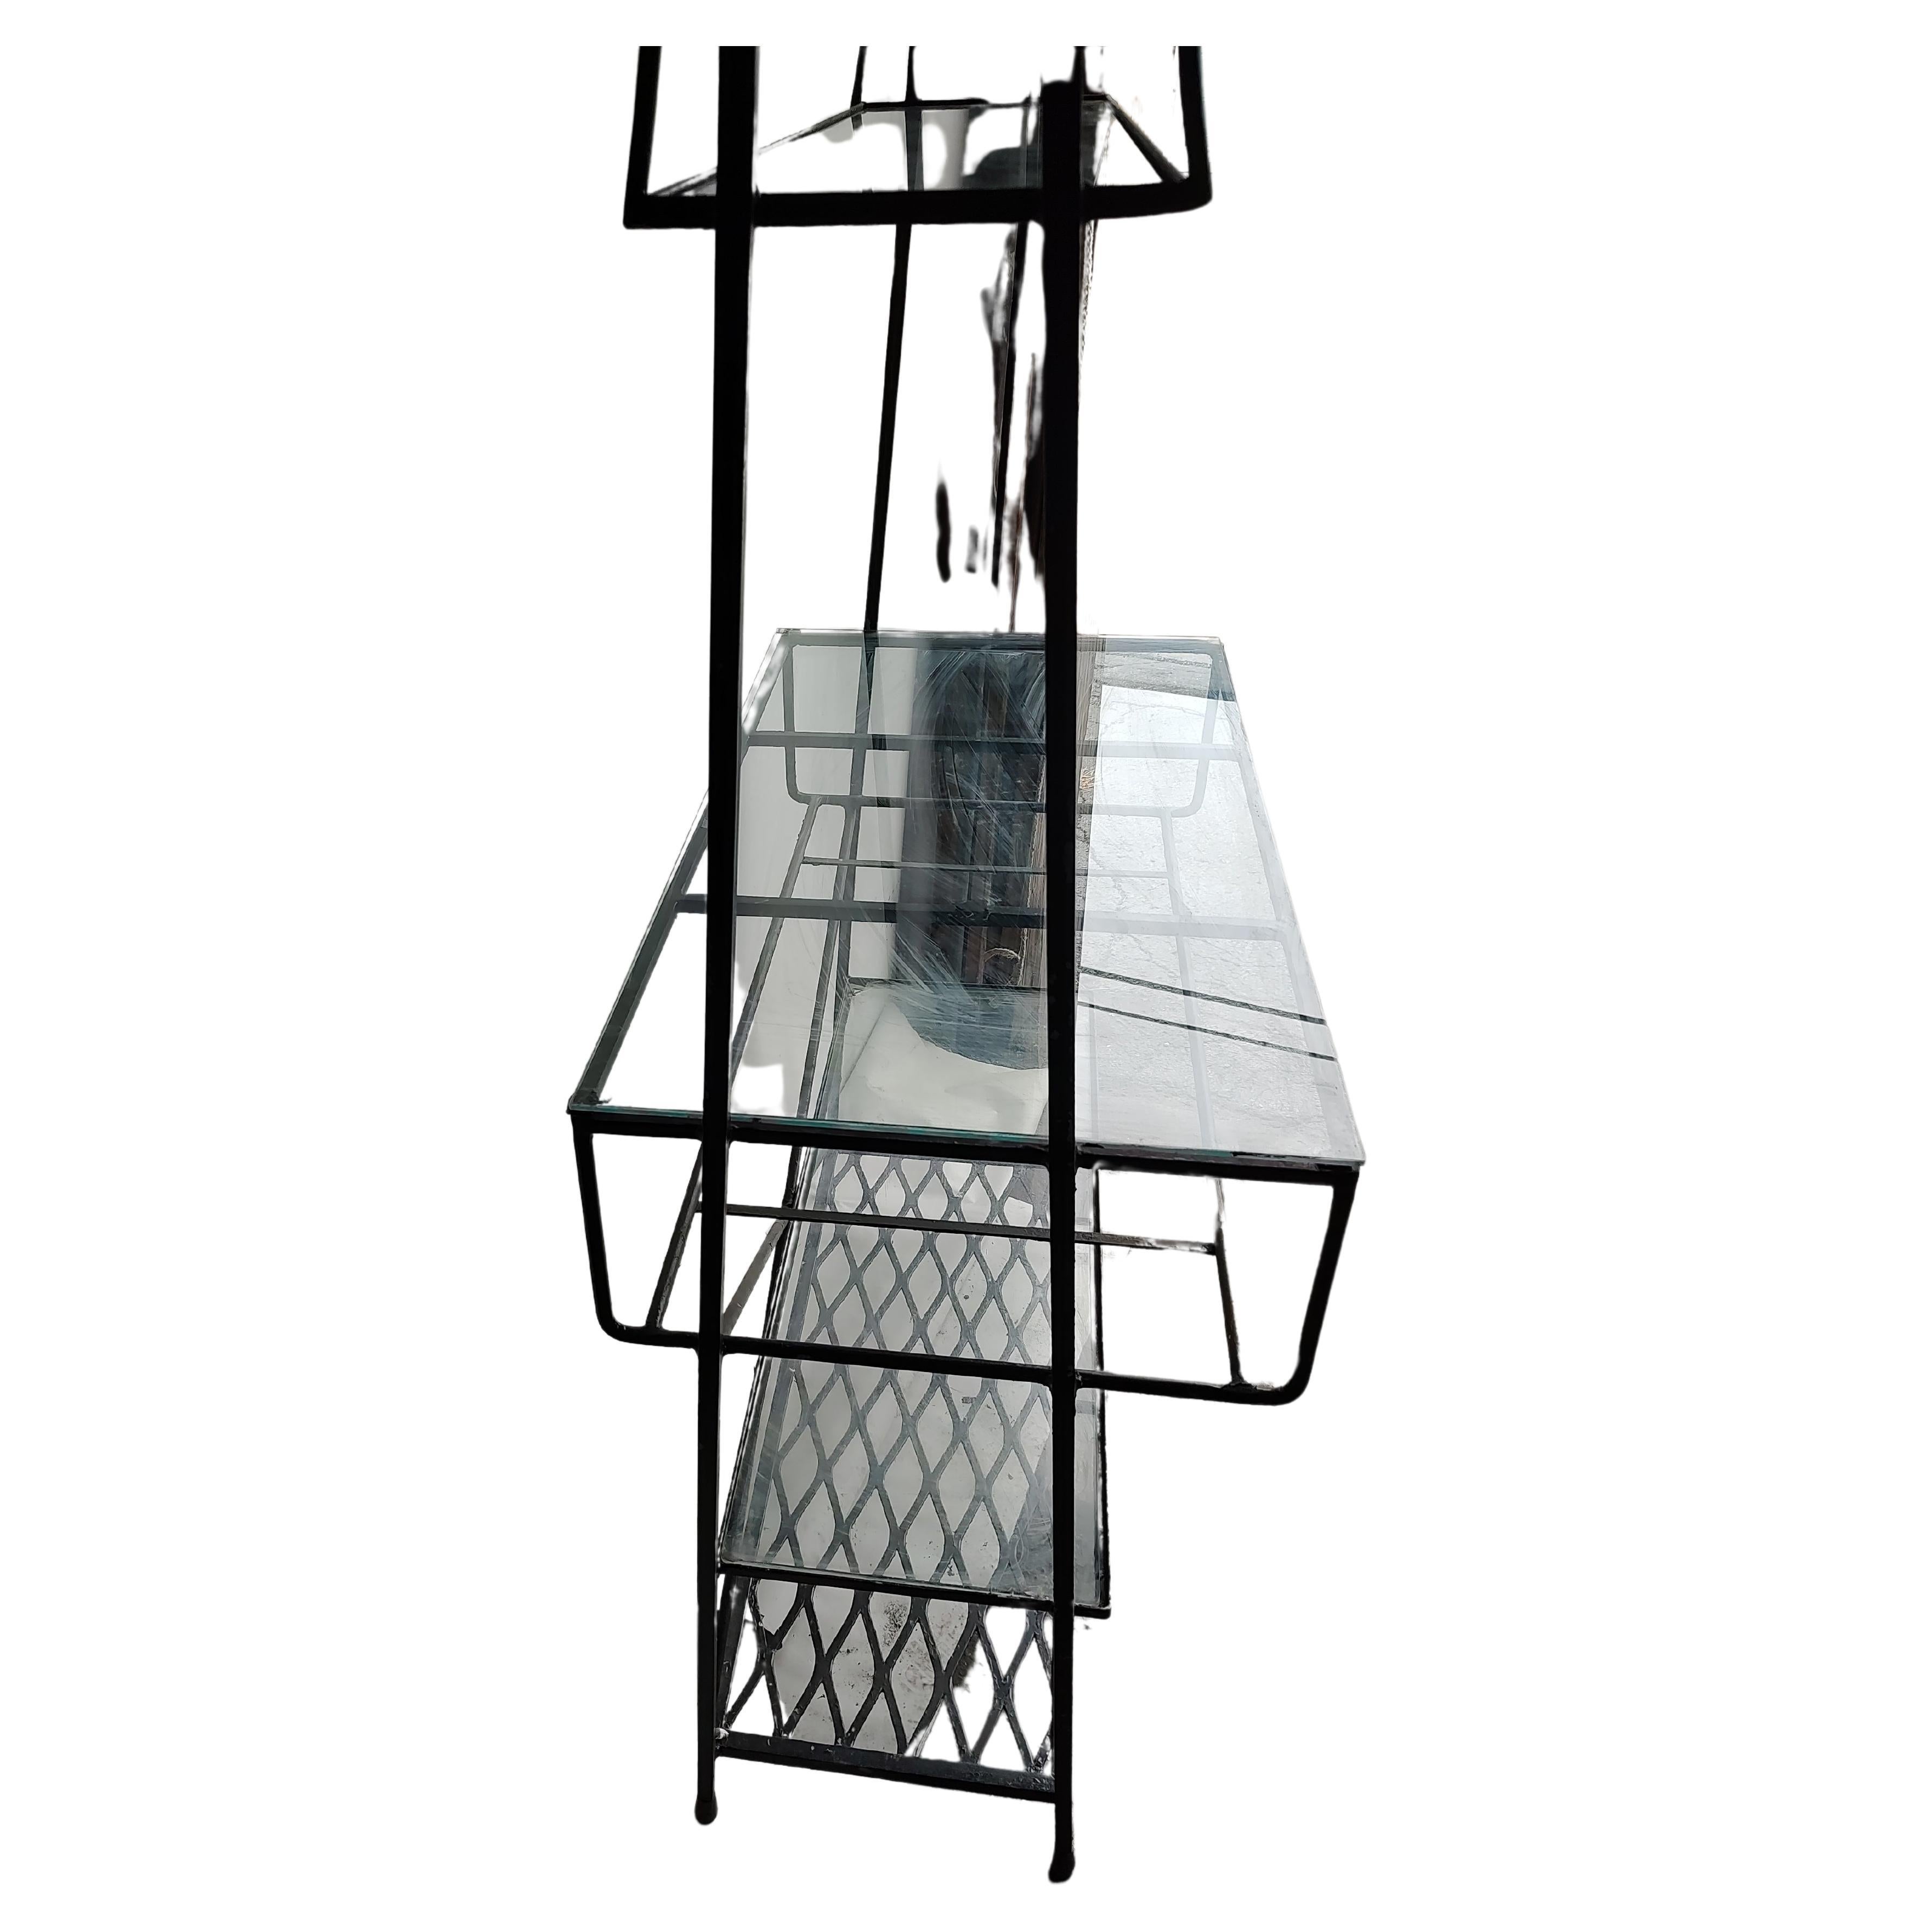 Fantastic iron etagere with 6 shelves 4 of them plate glass. Painted Black iron with a tapered support at the sides. Narrows as it gets taller. Cross x brace at the backside bottom. In excellent vintage condition with minimal wear and lots of old